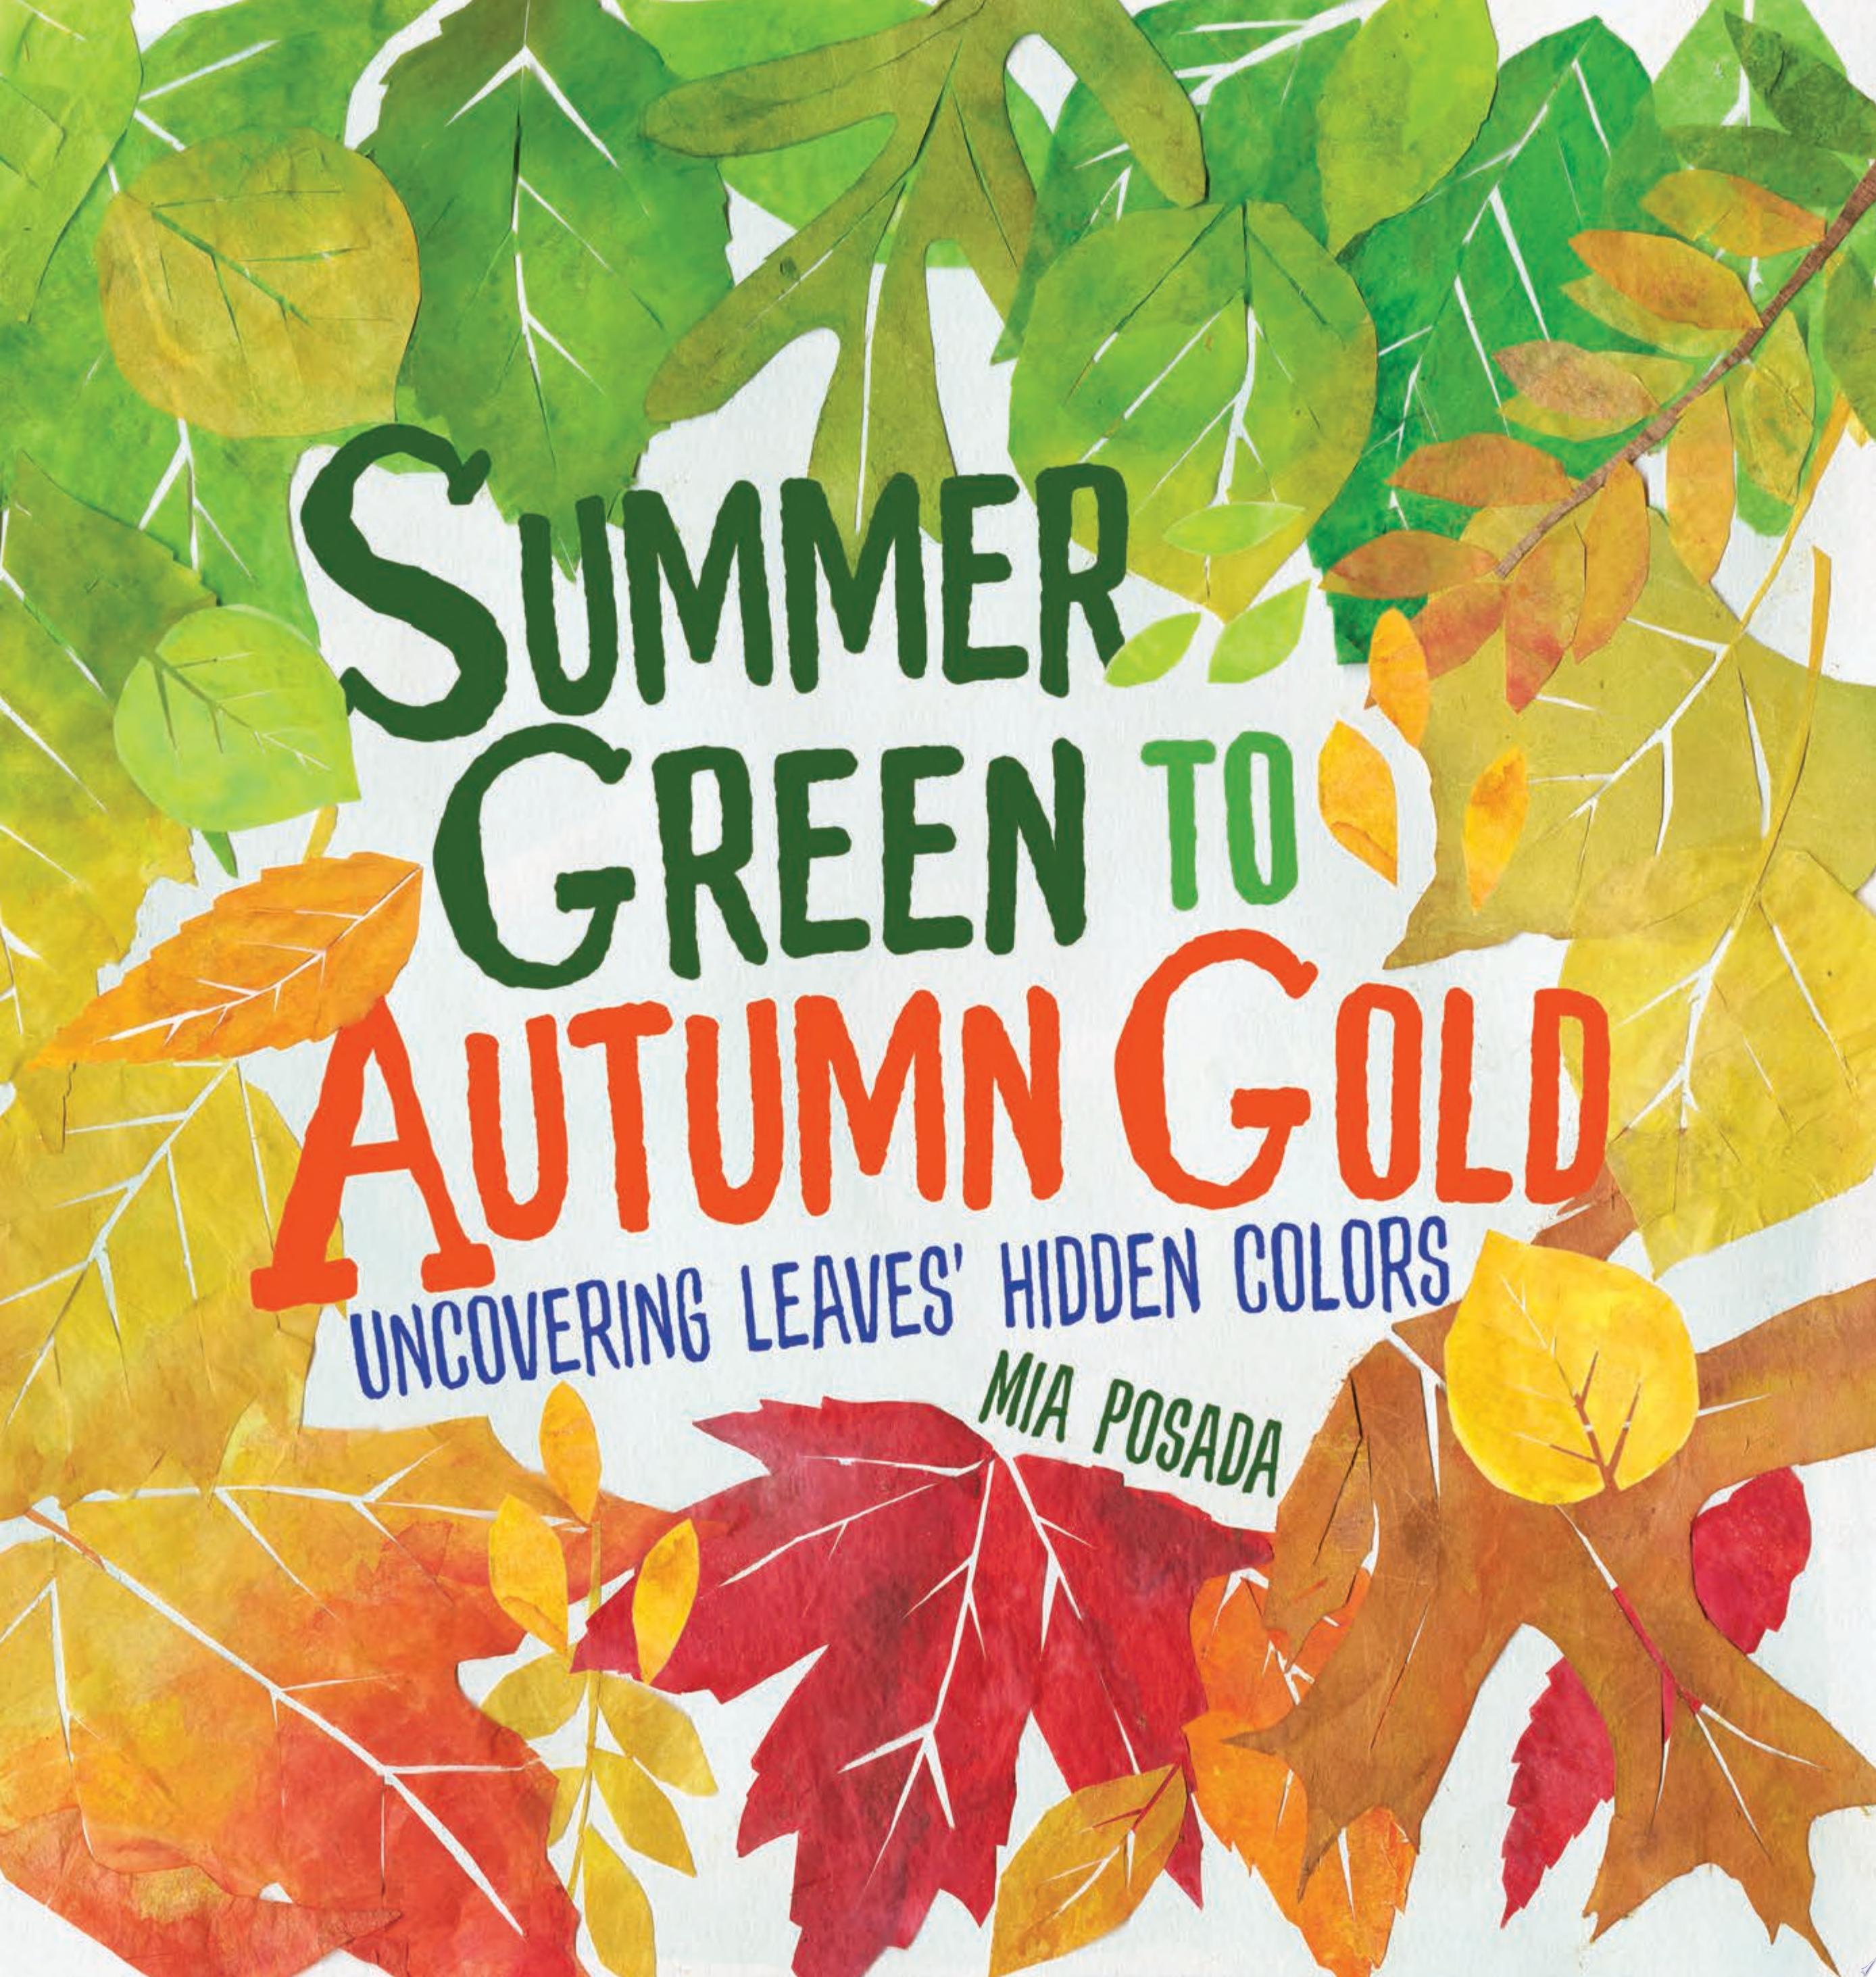 Image for "Summer Green to Autumn Gold"